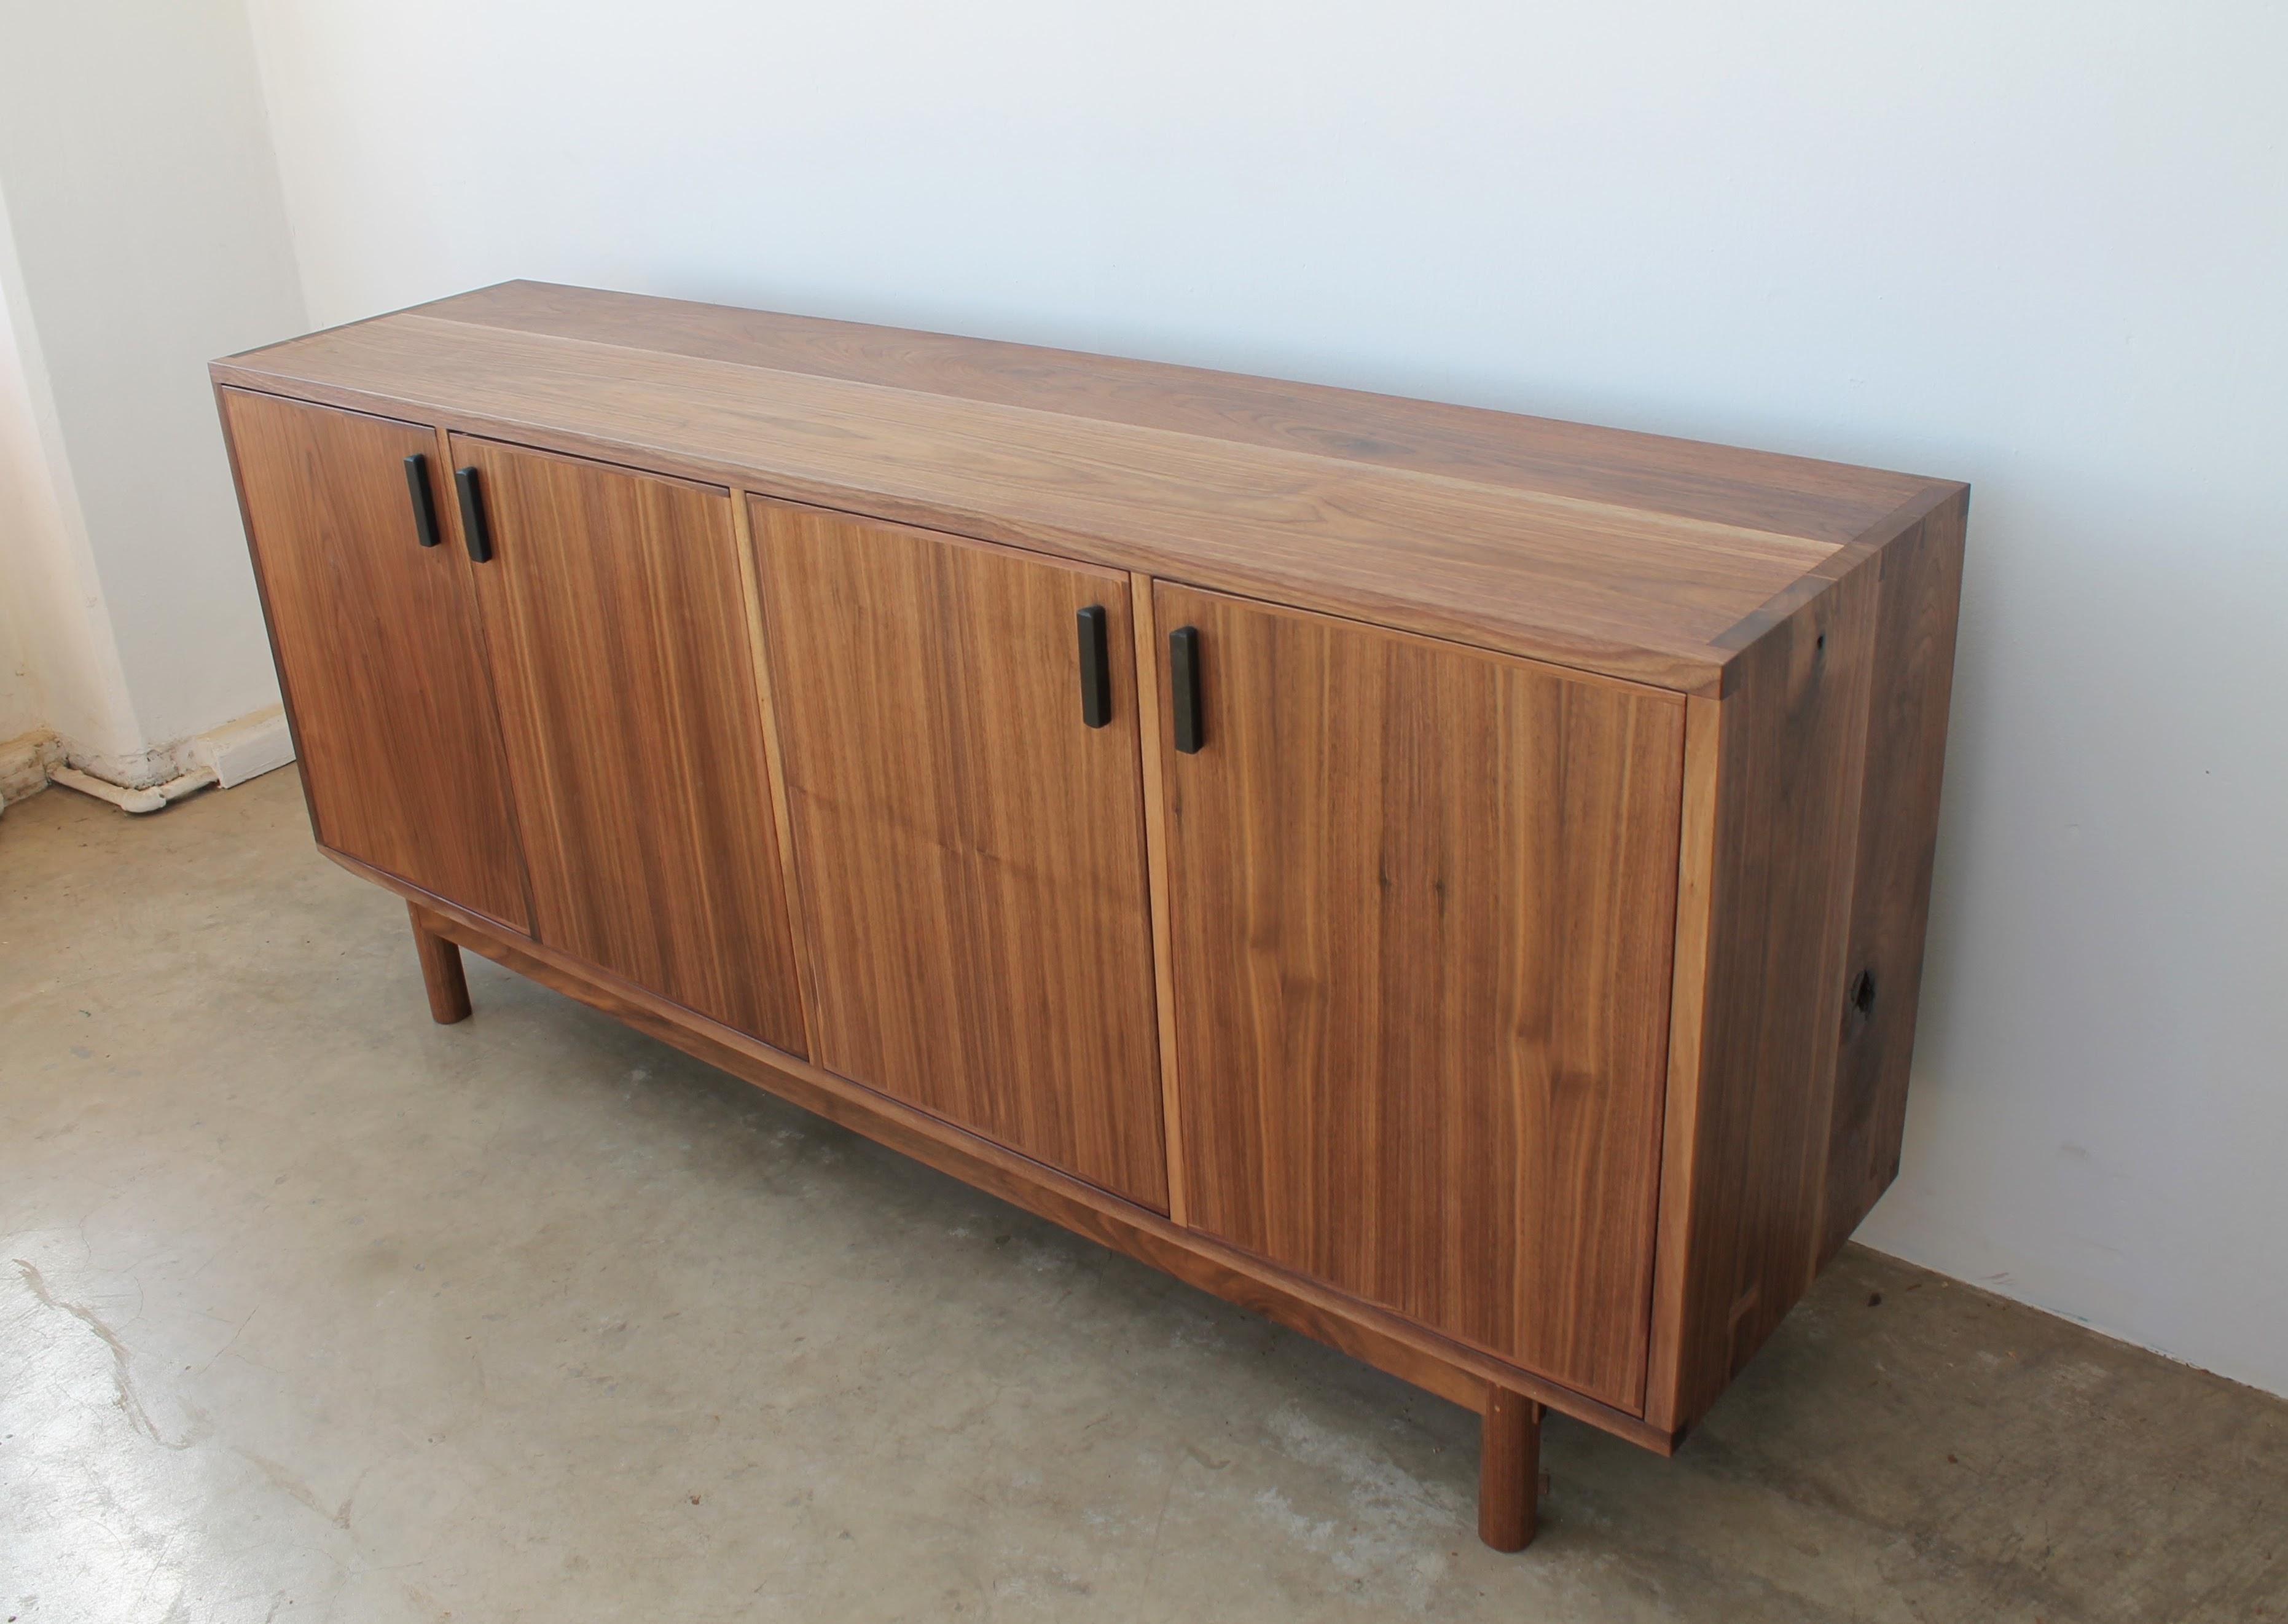 The Dune Allen credenza is crafted to handle all your storage needs with refined simplicity. Clean lines and strong joinery amount to a piece that is sturdy, yet elegant. The carcass is built from 1 1/4